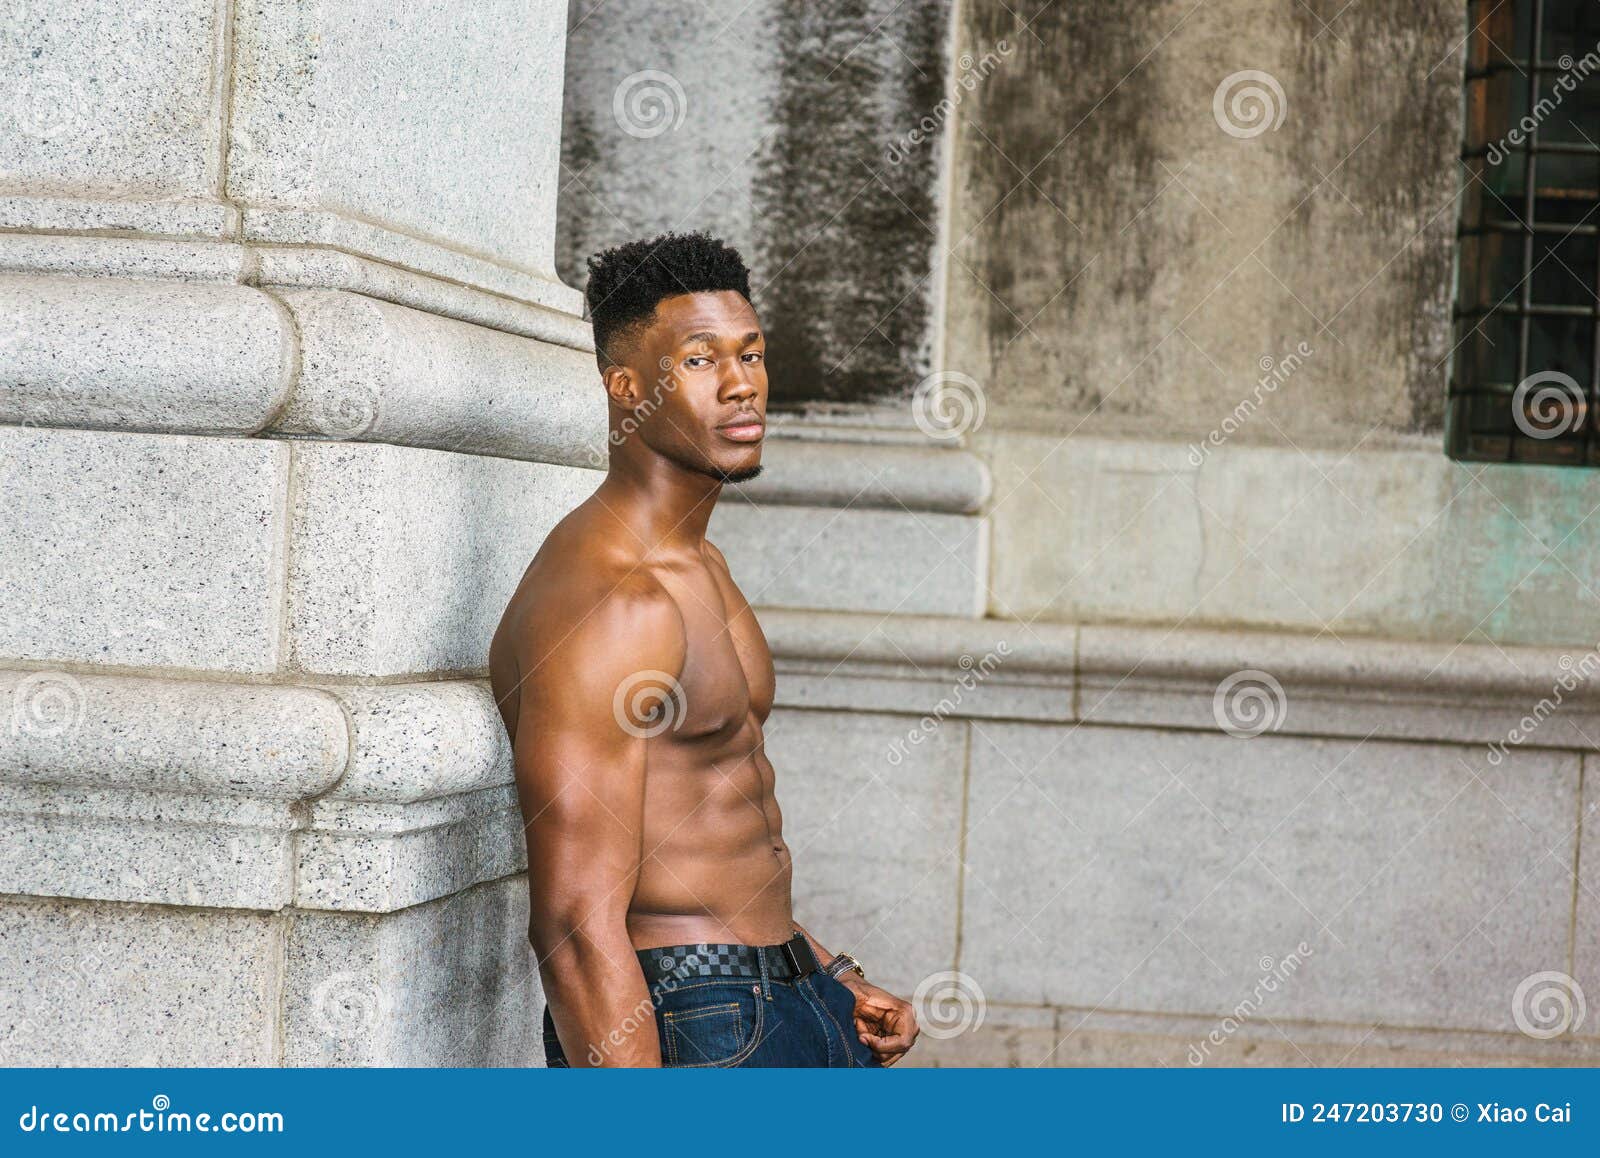 Hot Black People Nude - Young Black Man Standing Outdoors in New York City, Looking Away Stock  Photo - Image of city, fashion: 247203730